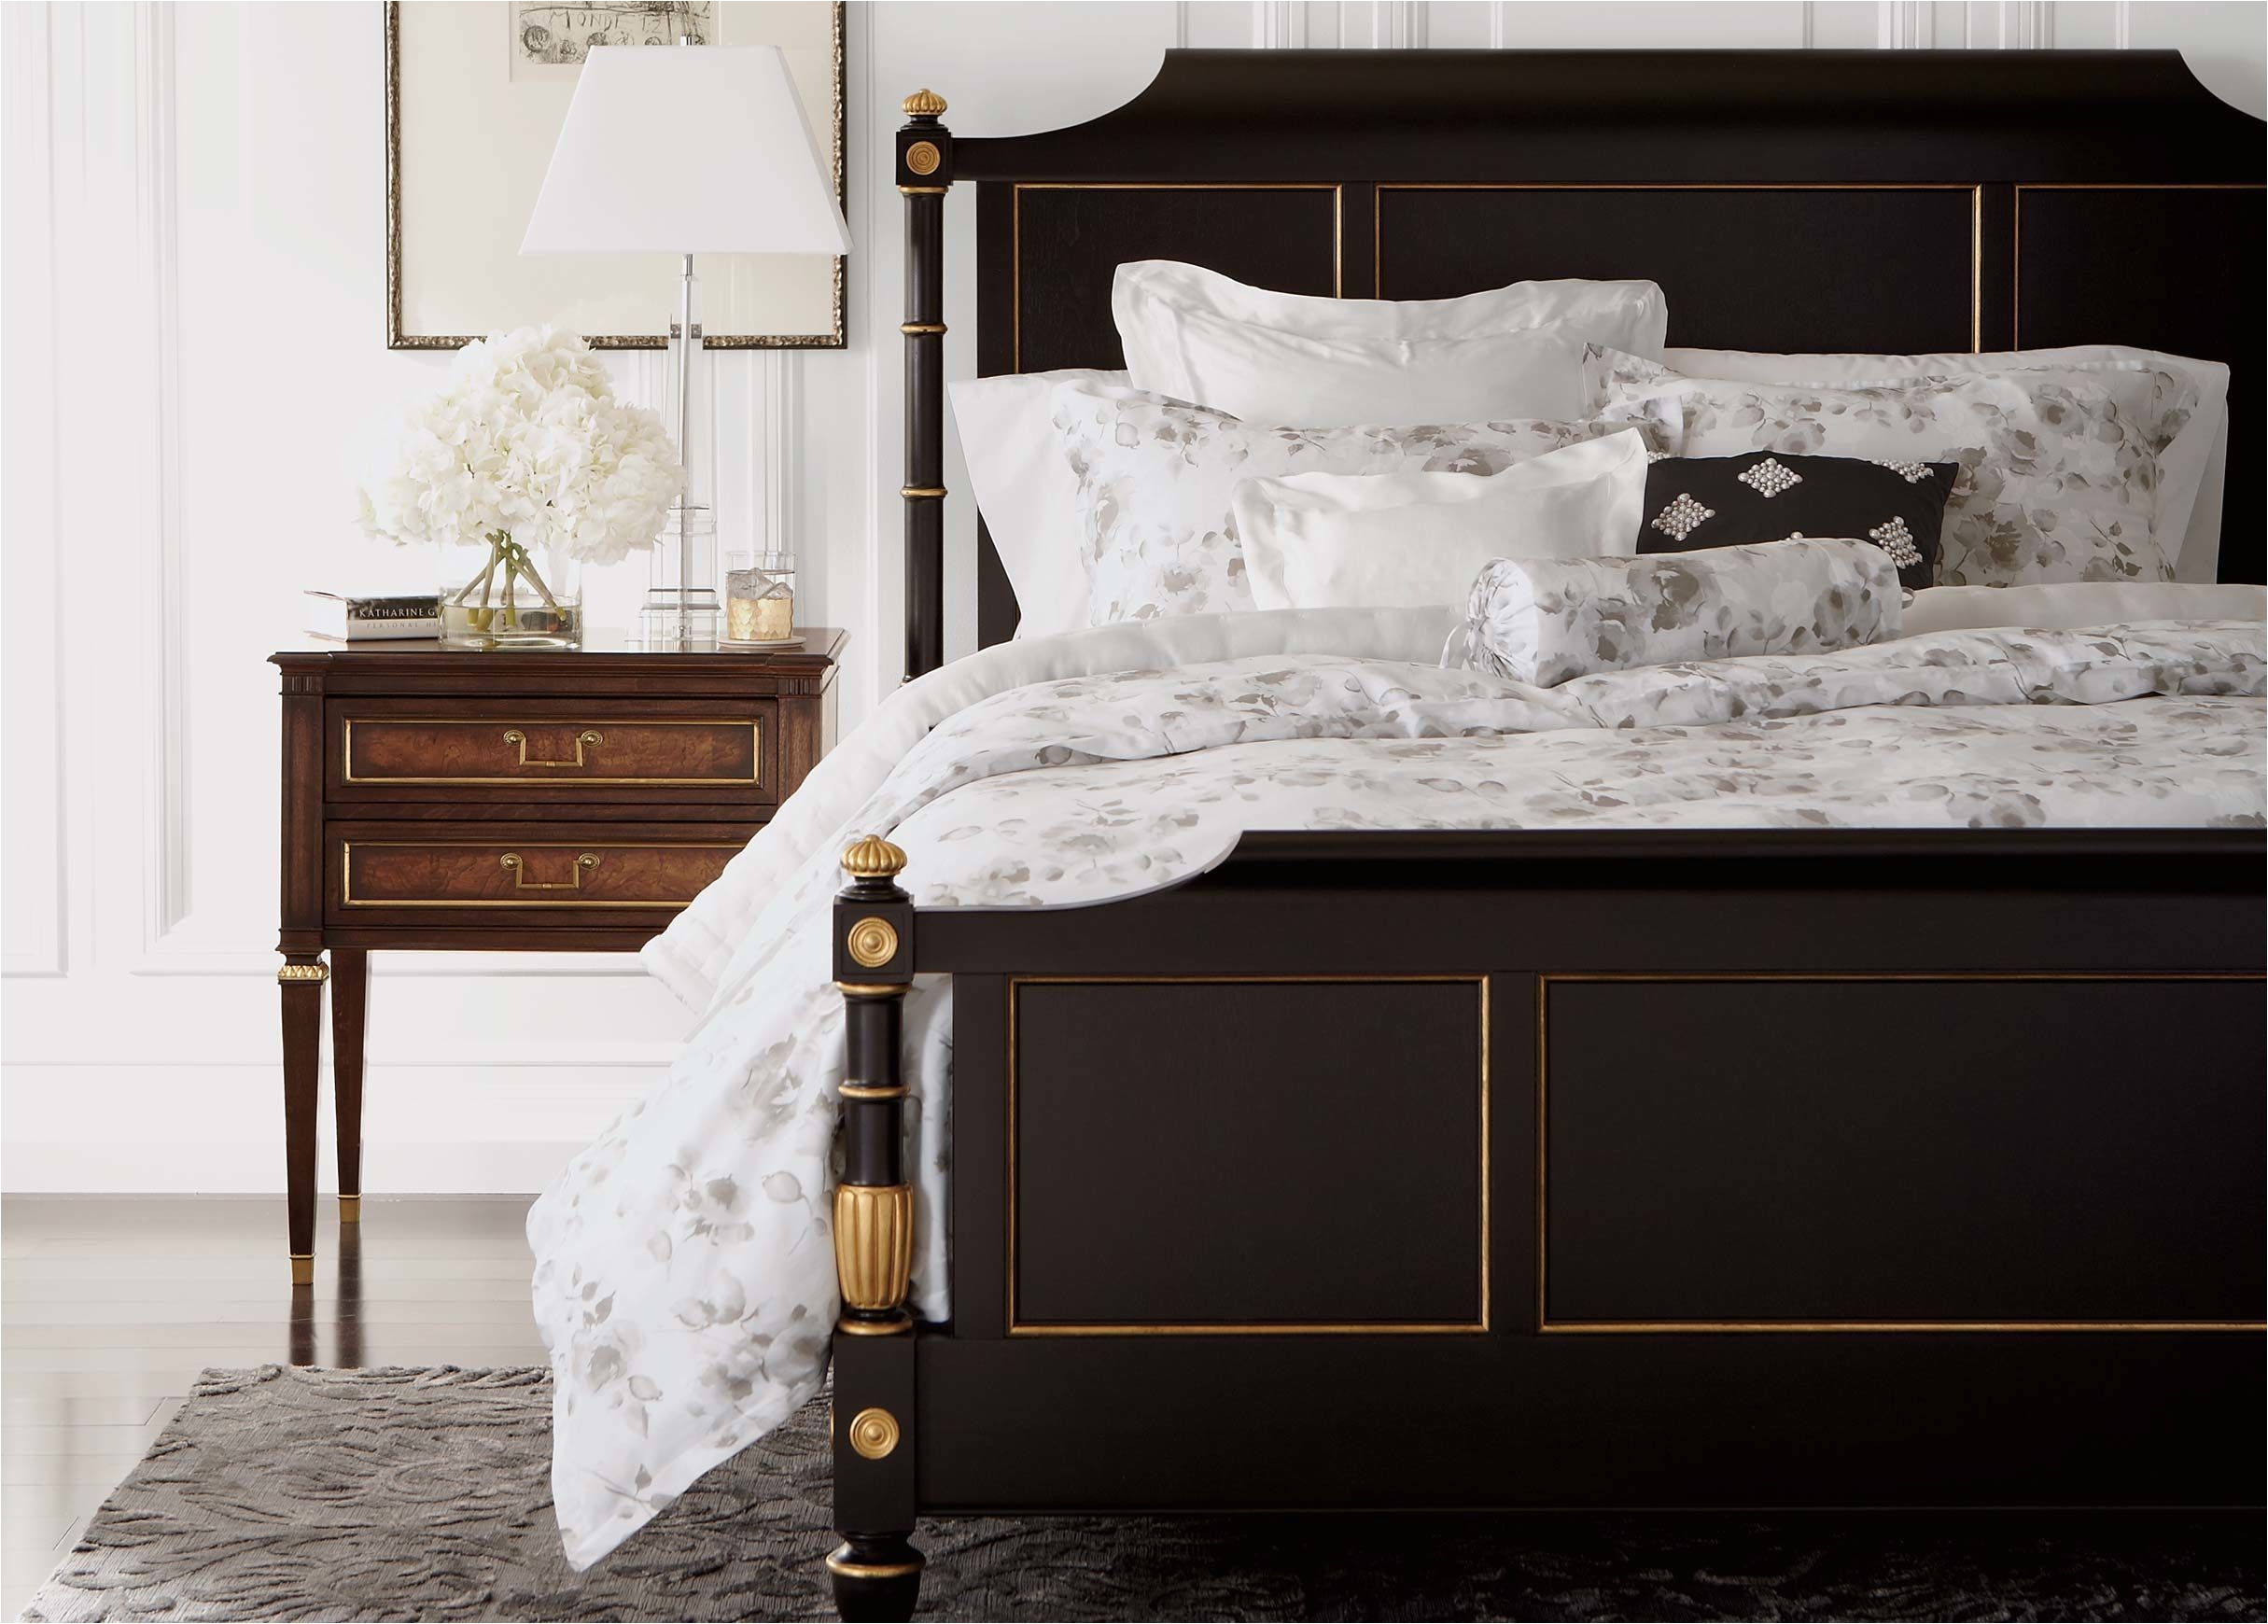 a scrolled headboard and footboard and posts adorned with bamboo style turnings fluted urns and rosette motifs crown the georgetown handcrafted in our